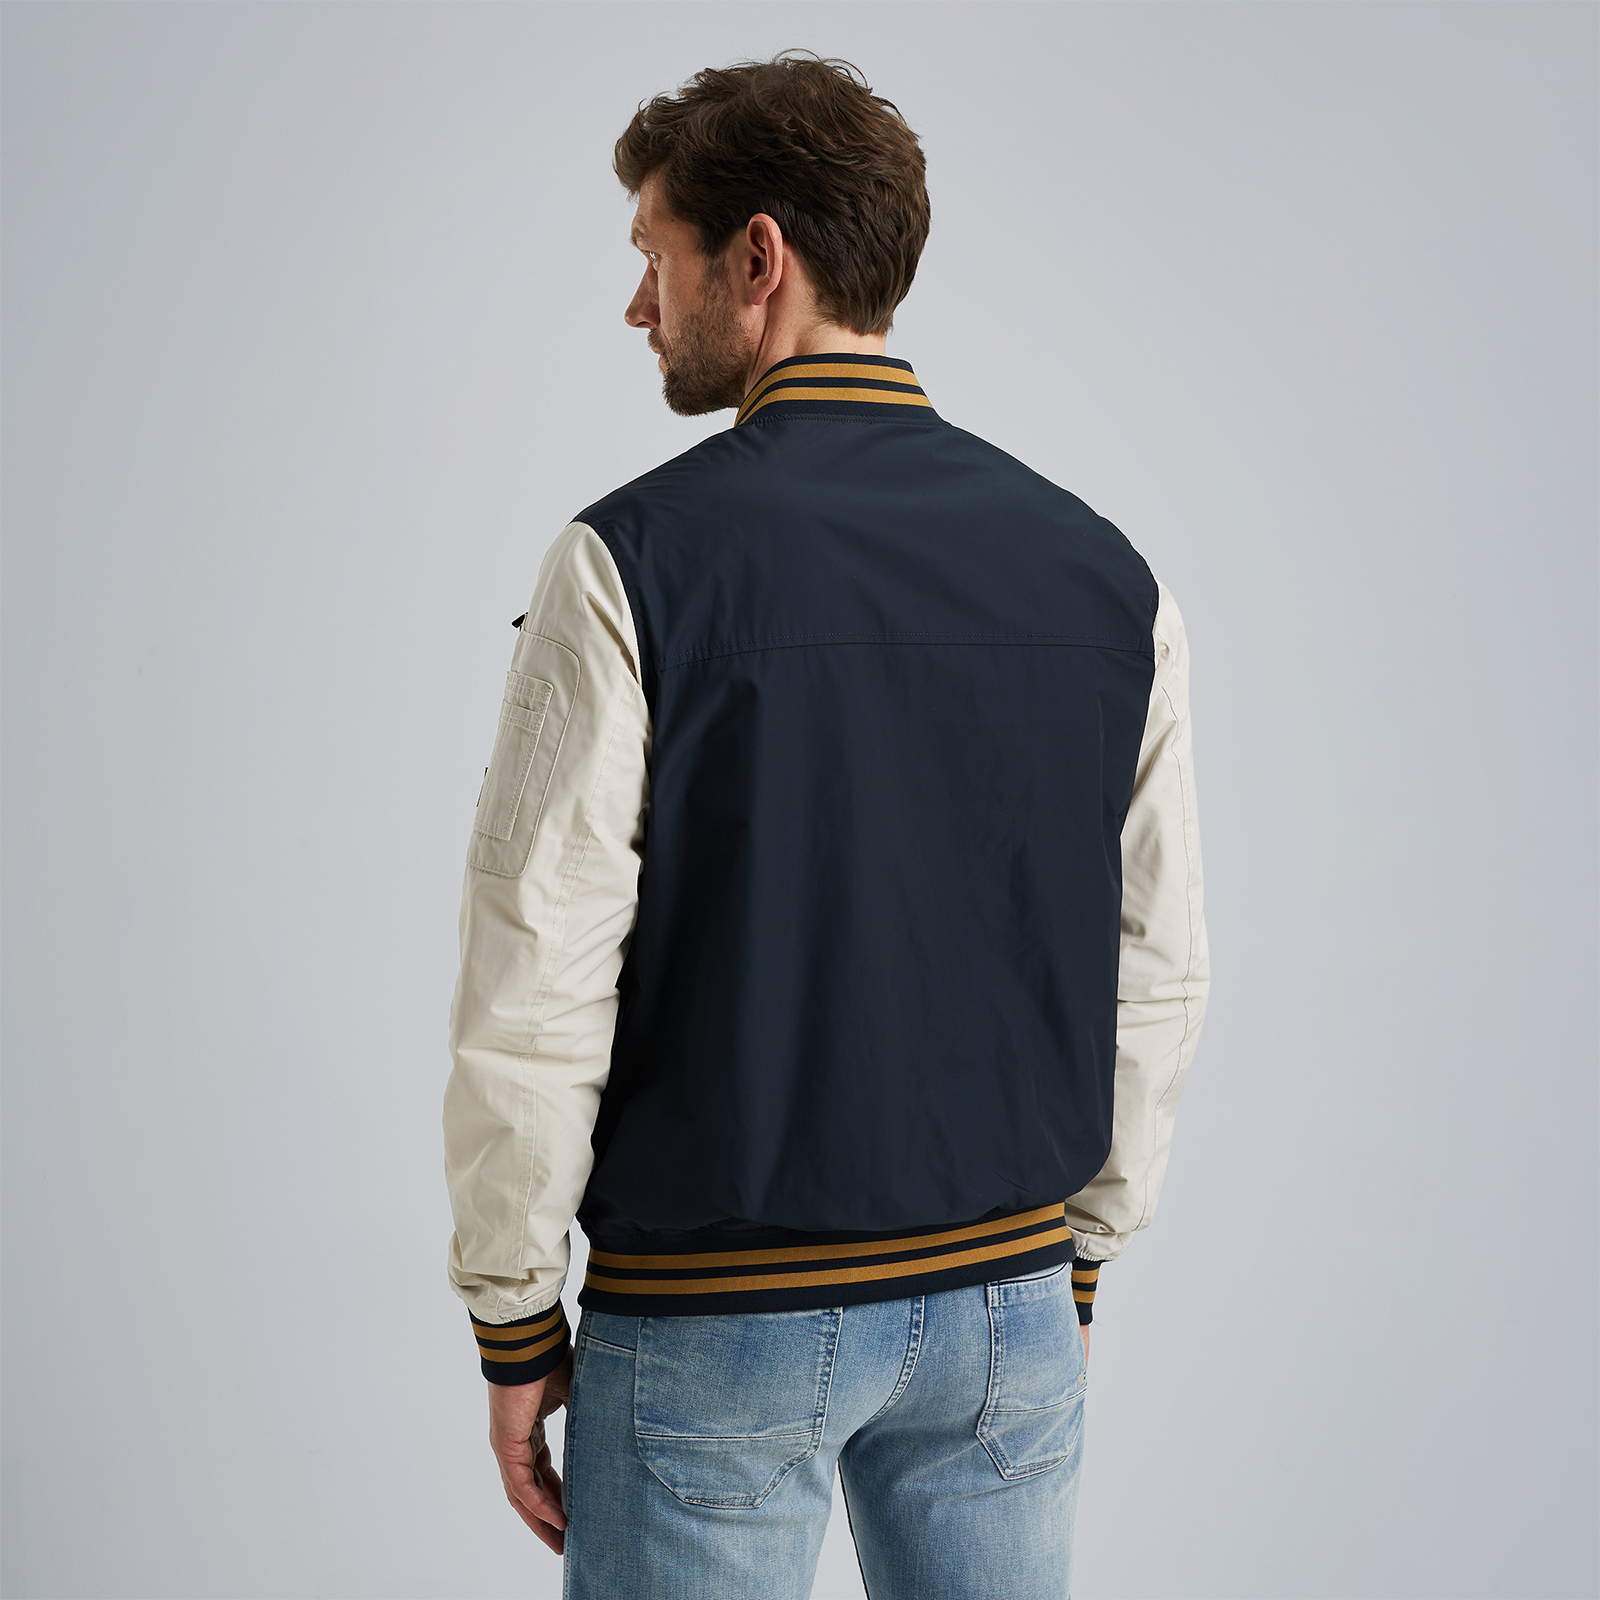 PME LEGEND | Reliant varsity jacket | Free shipping and returns